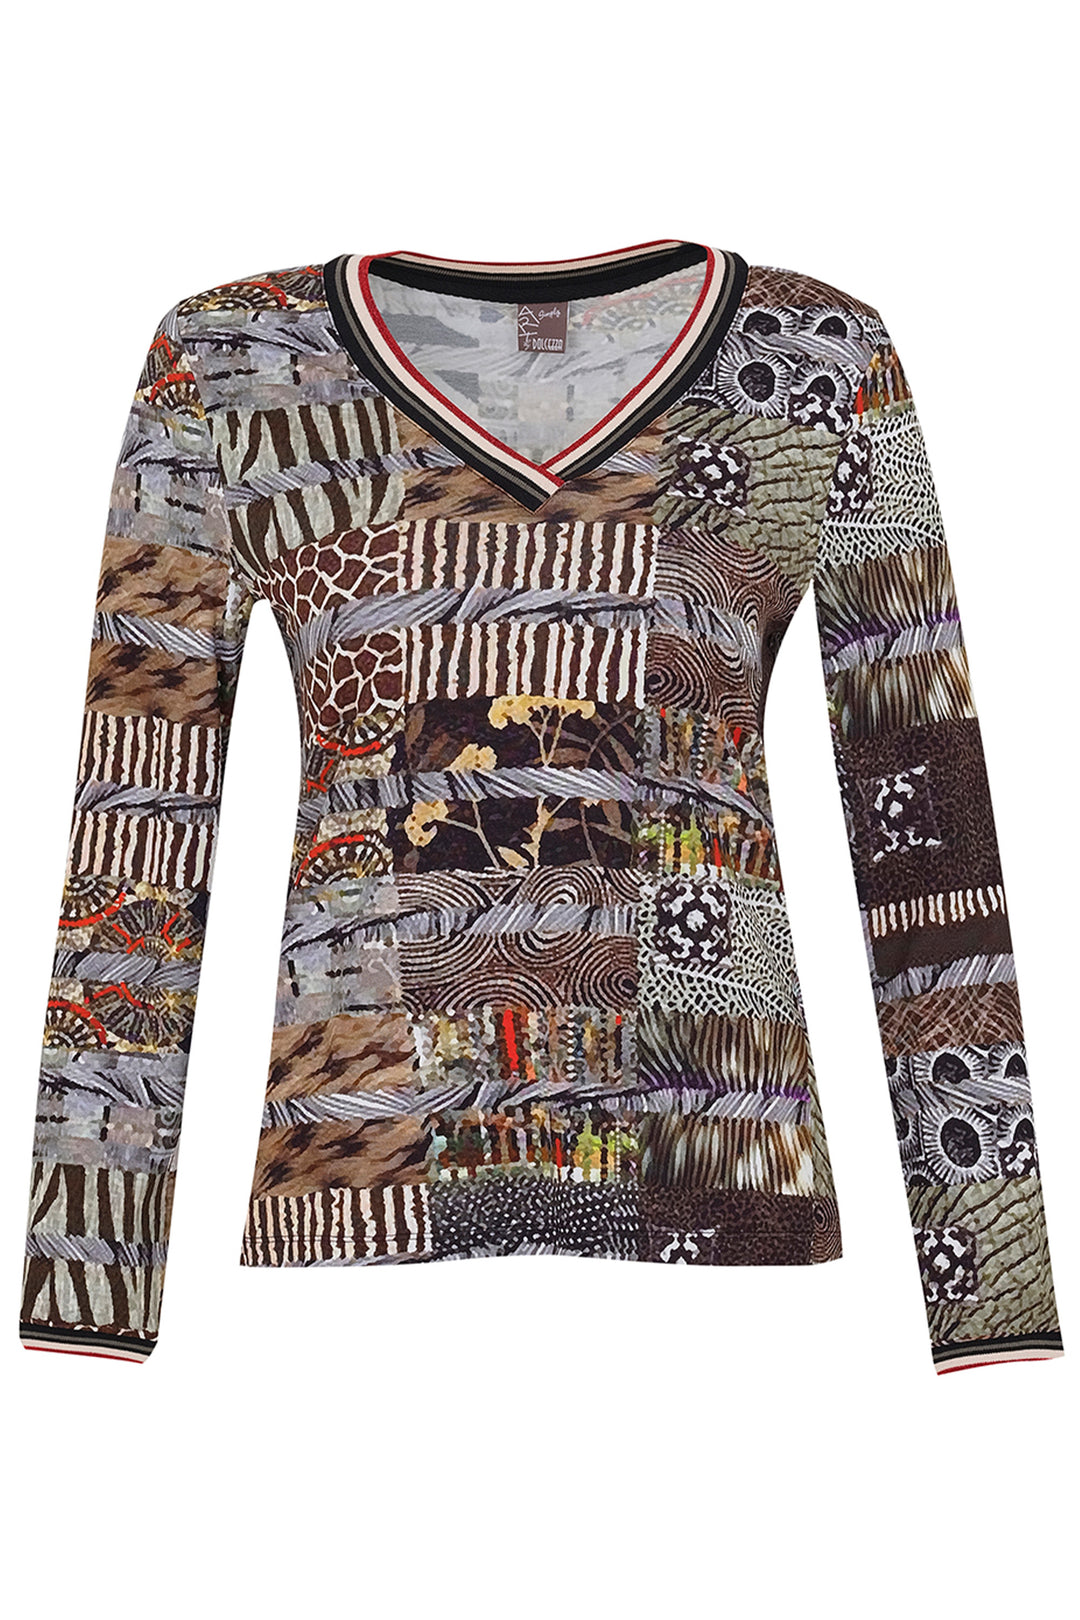 Made from comfort stretch fabric, it features stunning artwork by Sheree Joy Burlington. It comes with a flattering V-neck and full length sleeves, giving it a ageless look! 